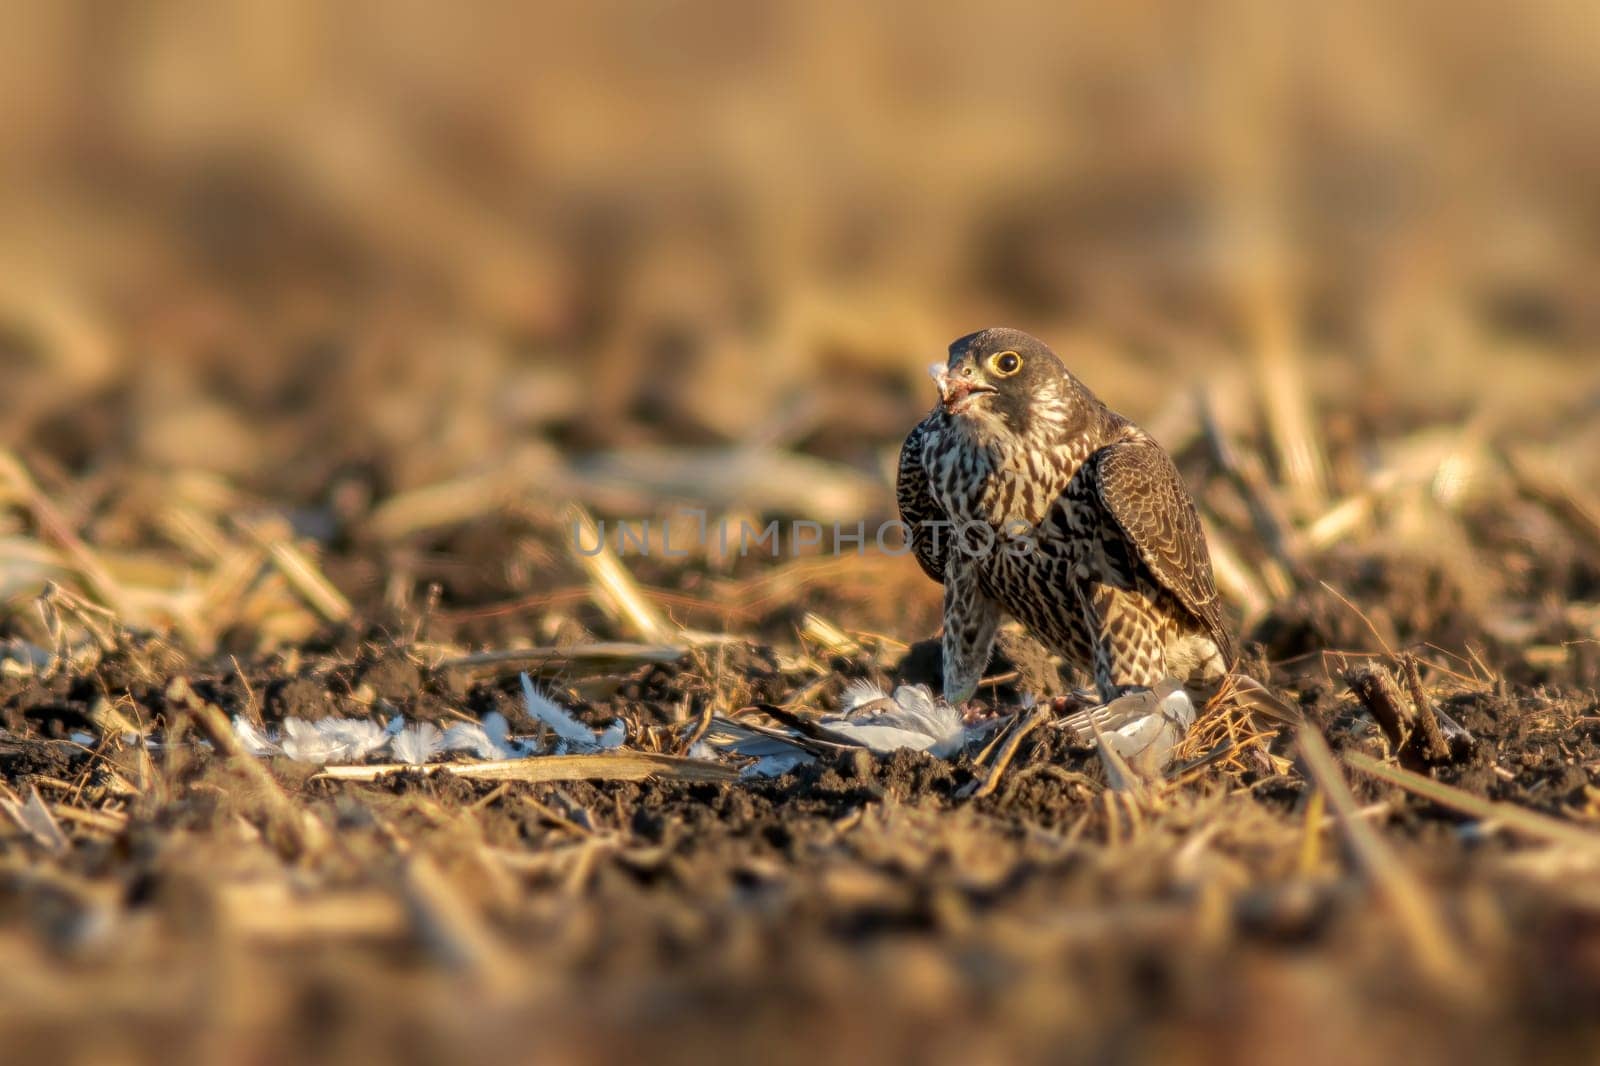 peregrine falcon sits on a harvested wheat field and eats its prey by mario_plechaty_photography